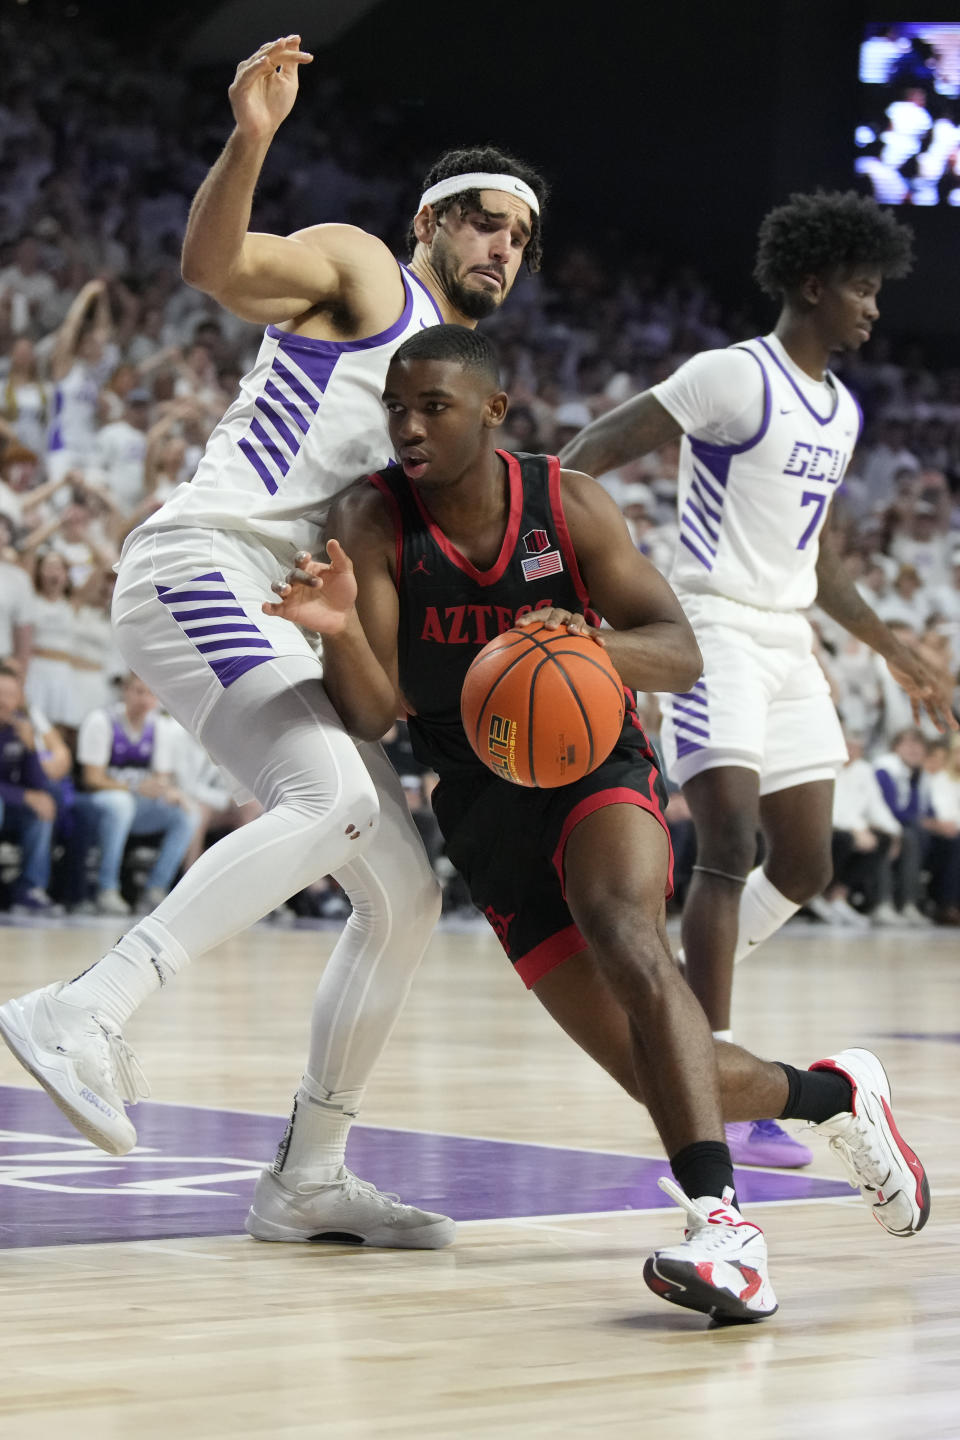 San Diego State guard Lamont Butler drives past Grand Canyon forward Gabe McGlothan, left, during the first half of an NCAA college basketball game Tuesday, Dec. 5, 2023, in Phoenix. (AP Photo/Rick Scuteri)